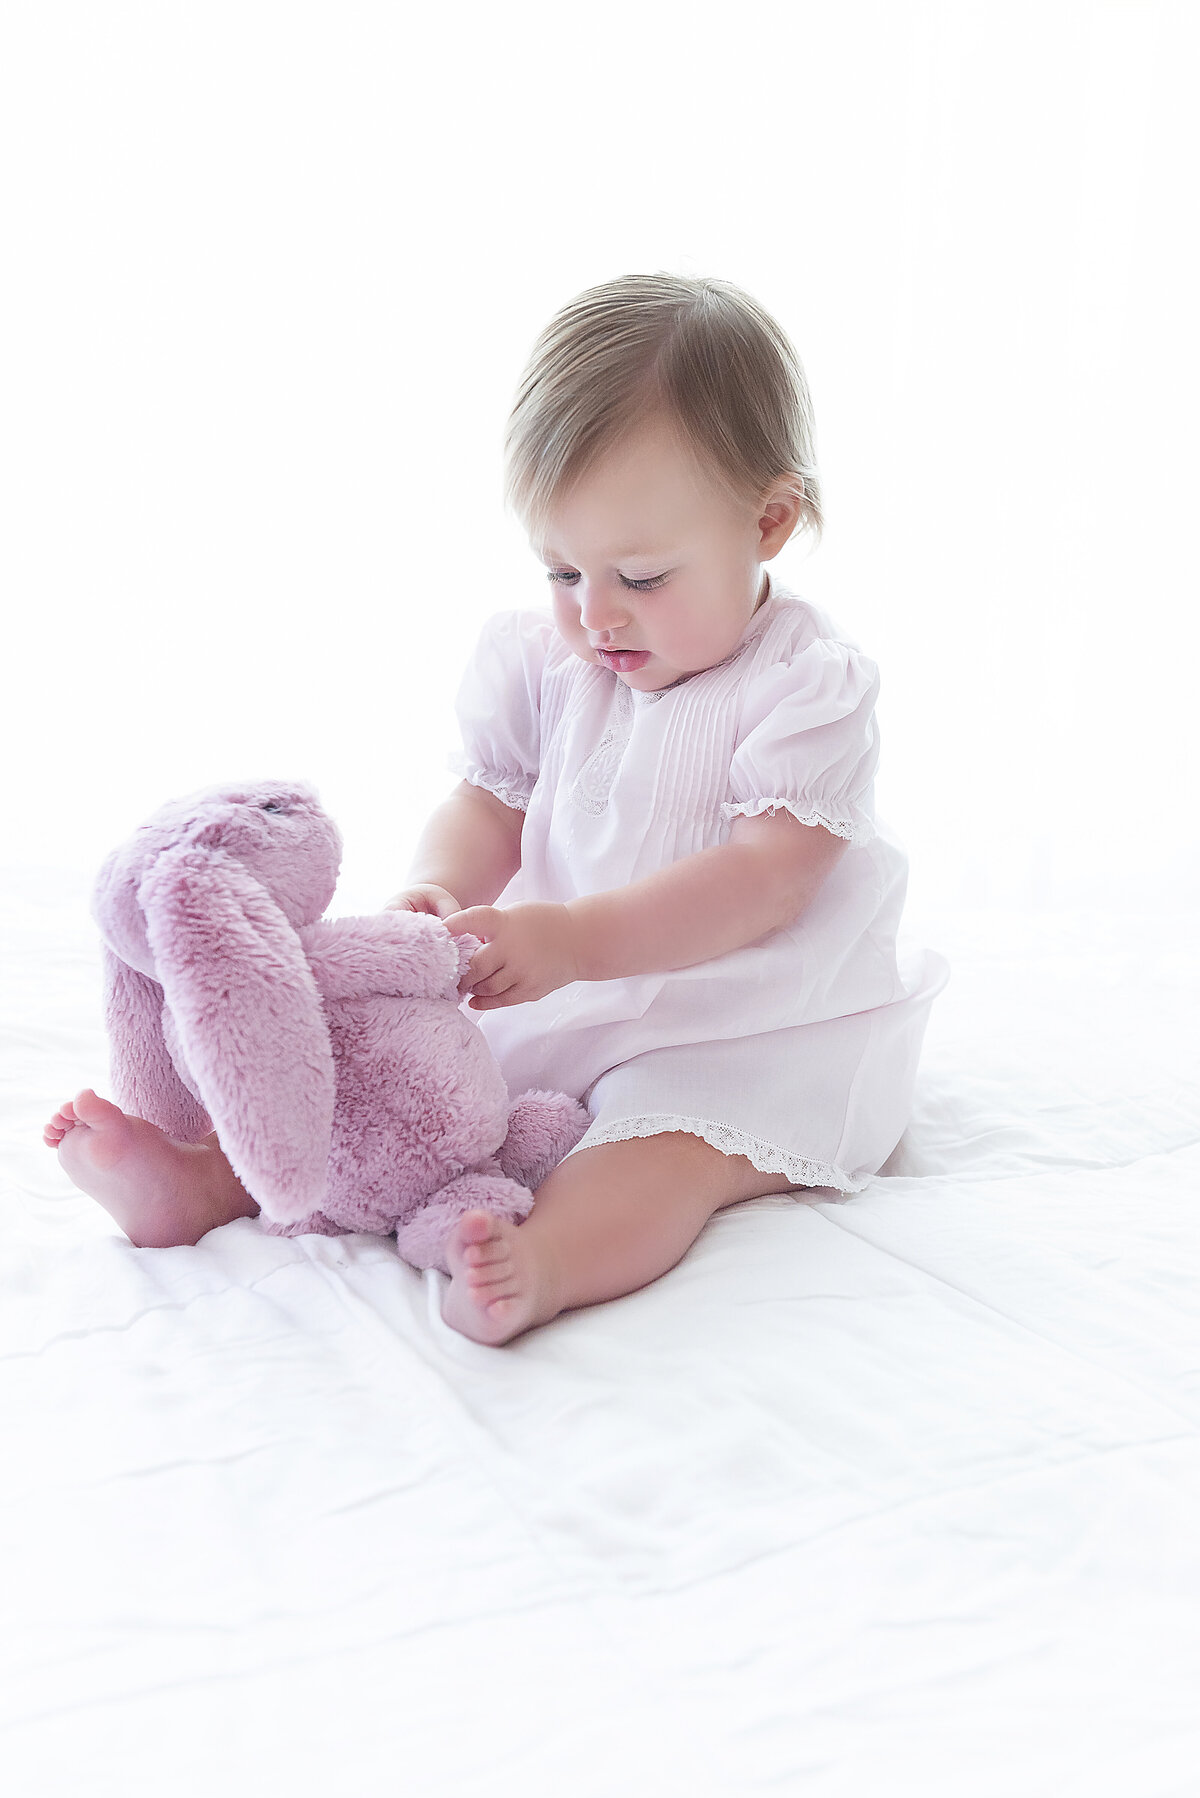 A toddler girl in a white dress sits on a bed playing with a pink stuffed bunny